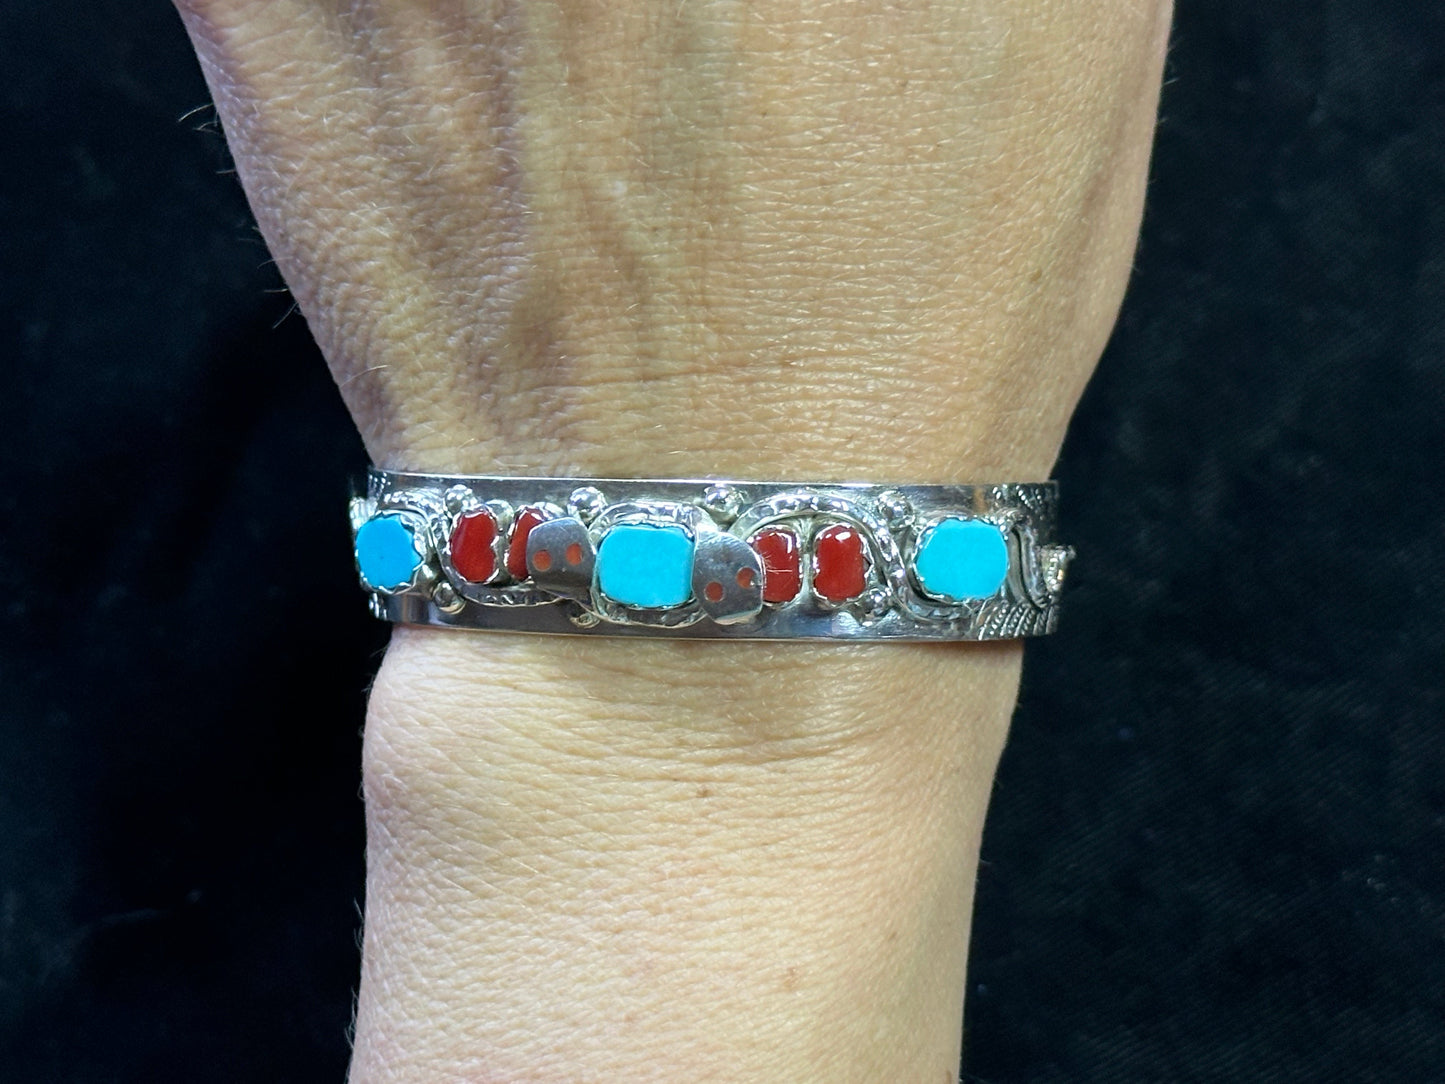 6" Snake Design Cuff with Turquoise and Coral Stones by Joy Calavaza, Zuni